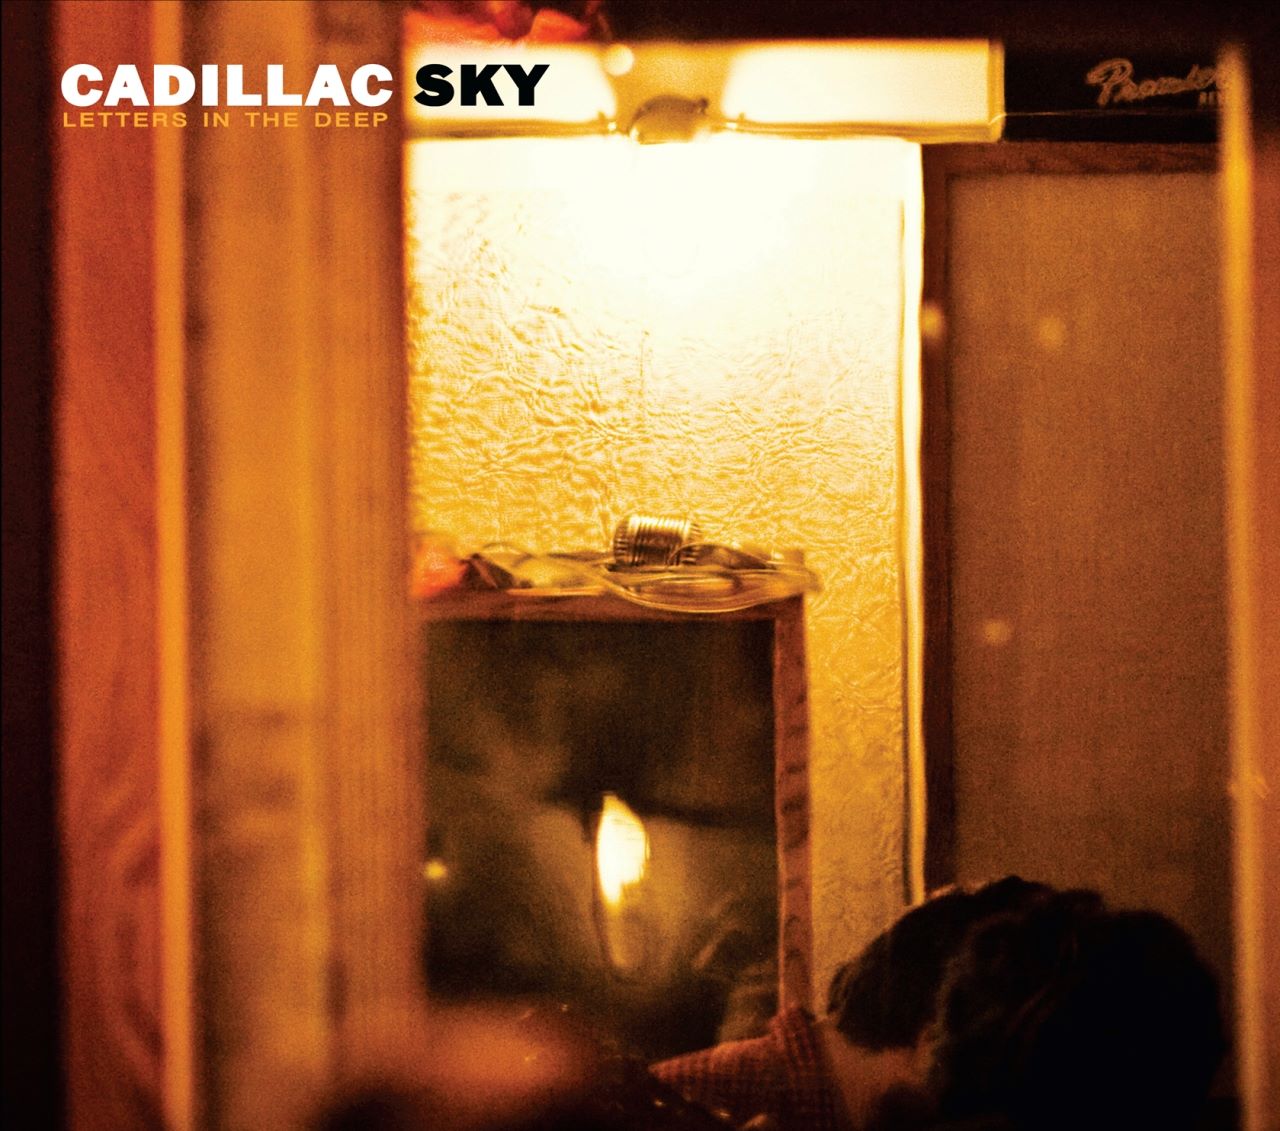 Cadillac Sky - Letters In The Deep cover album